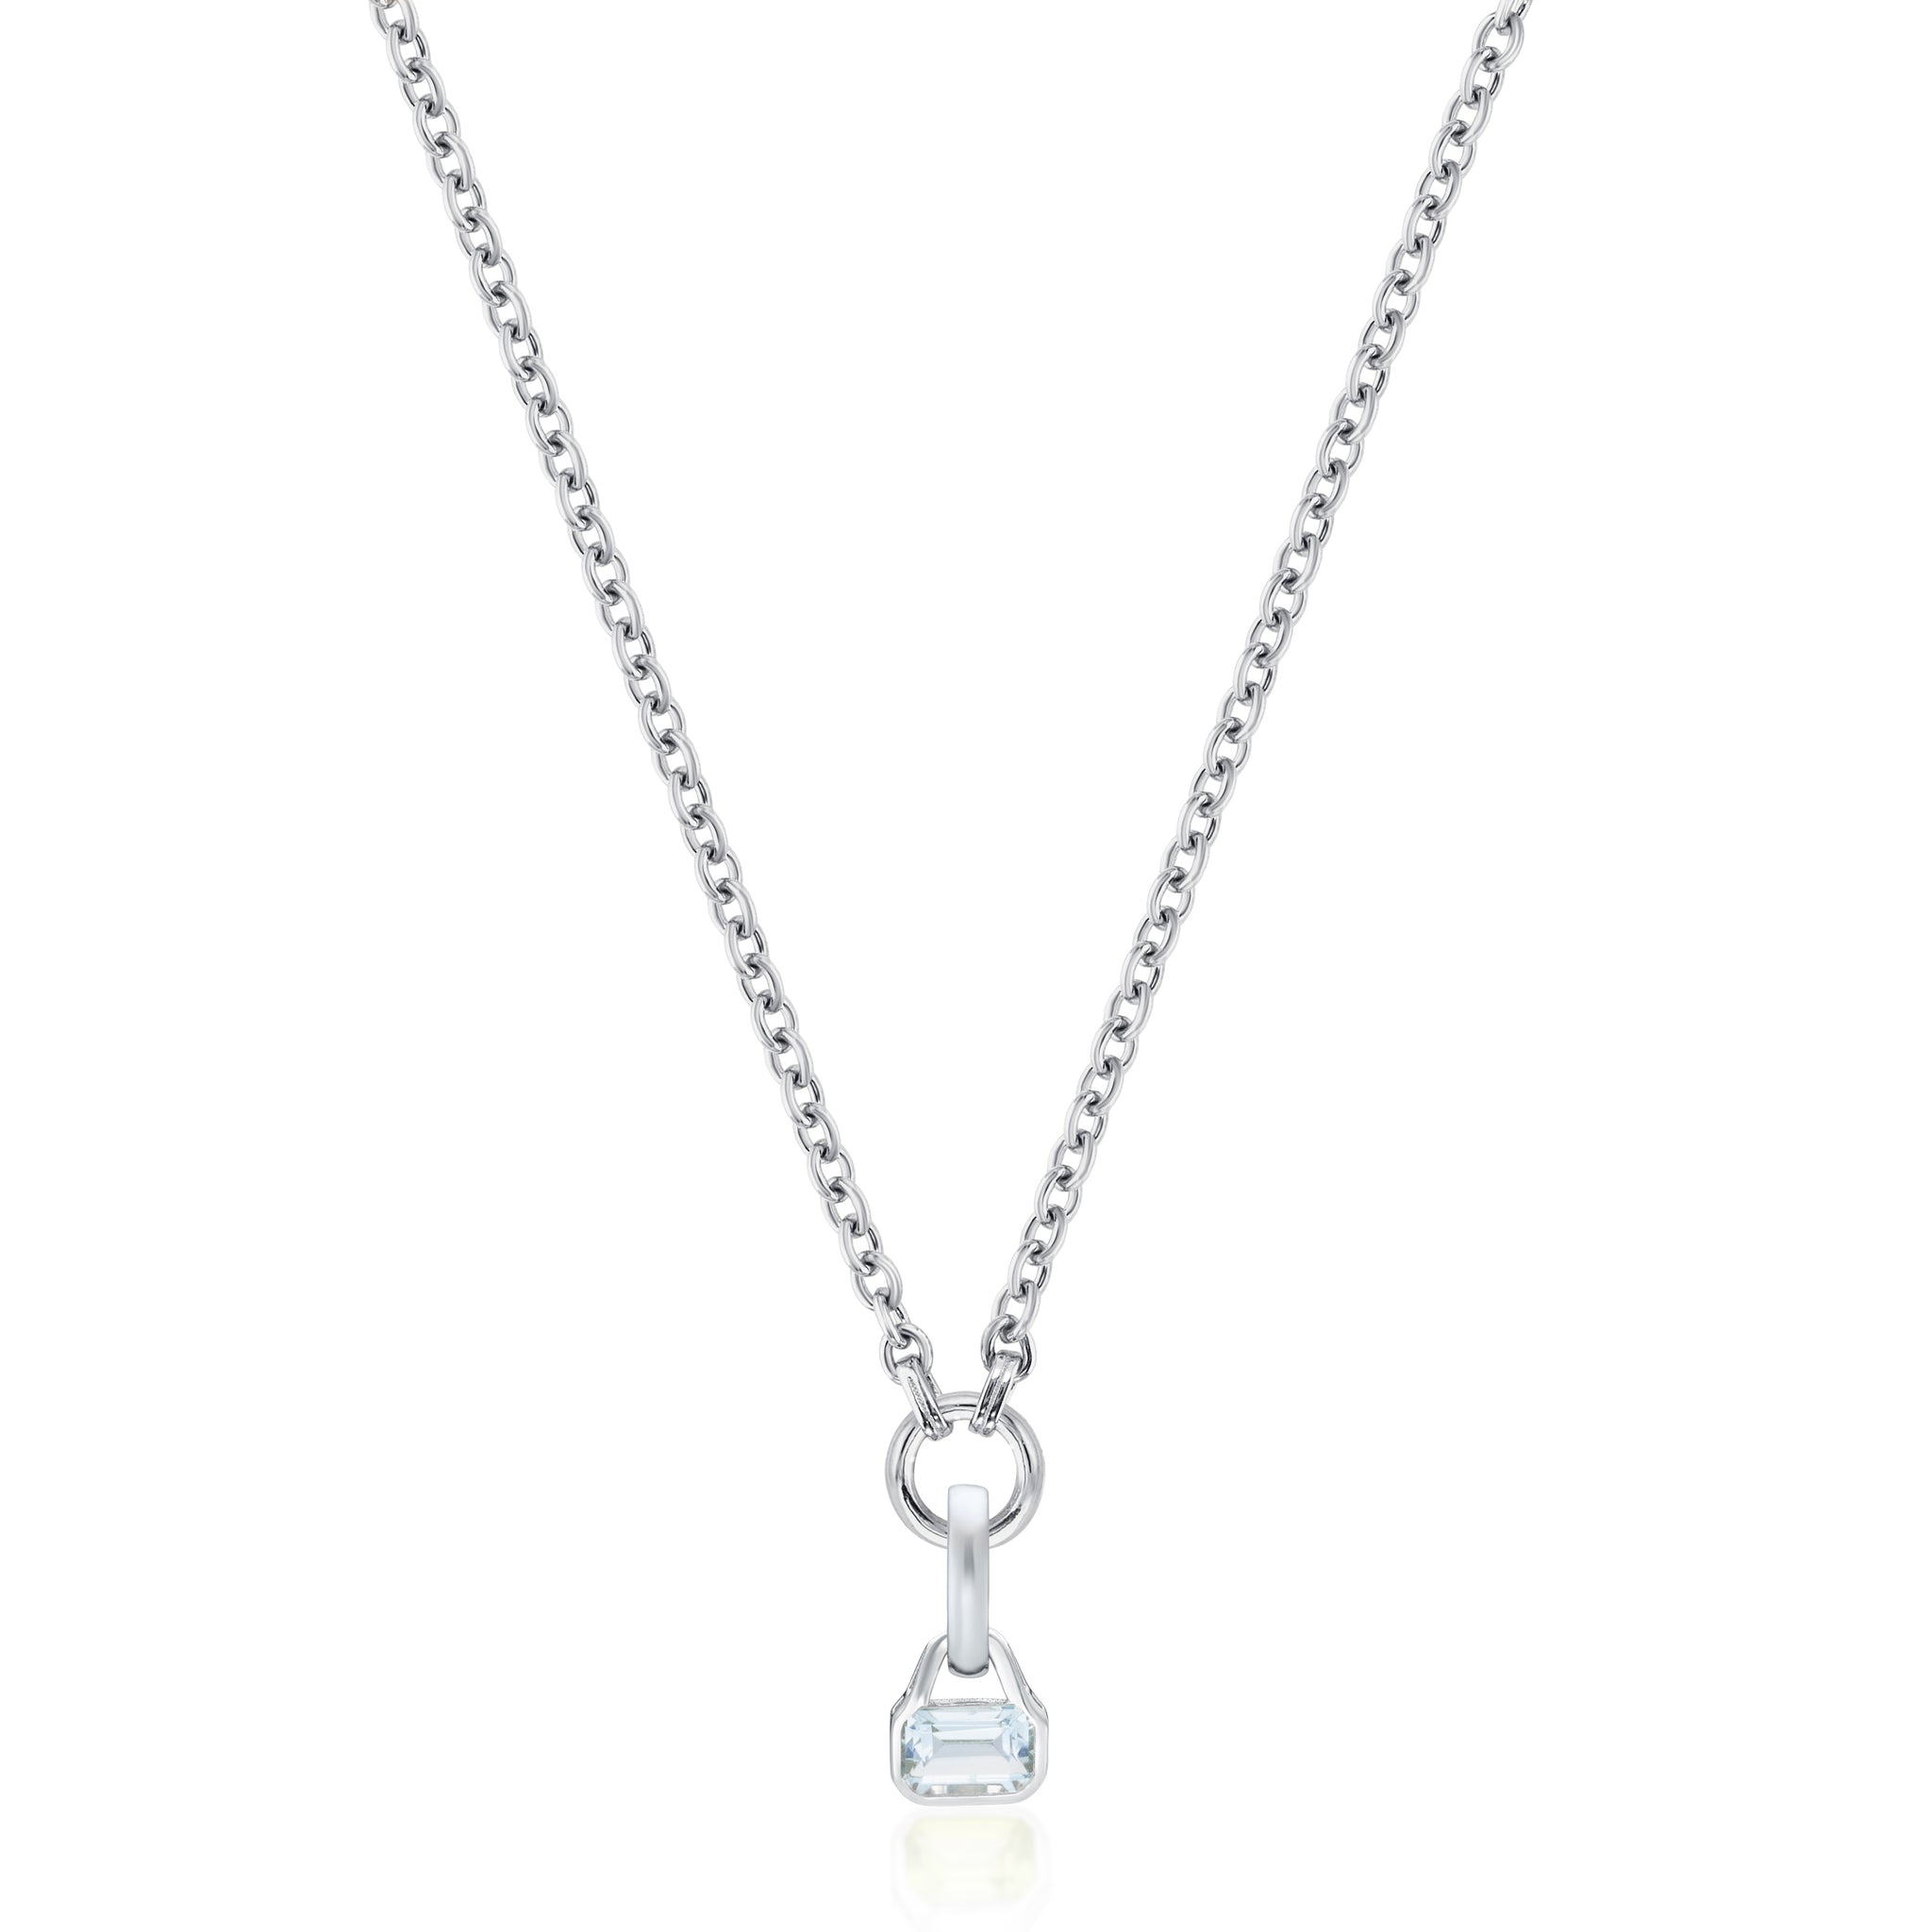 Blue Topaz Charm (March) on Carrier Chain